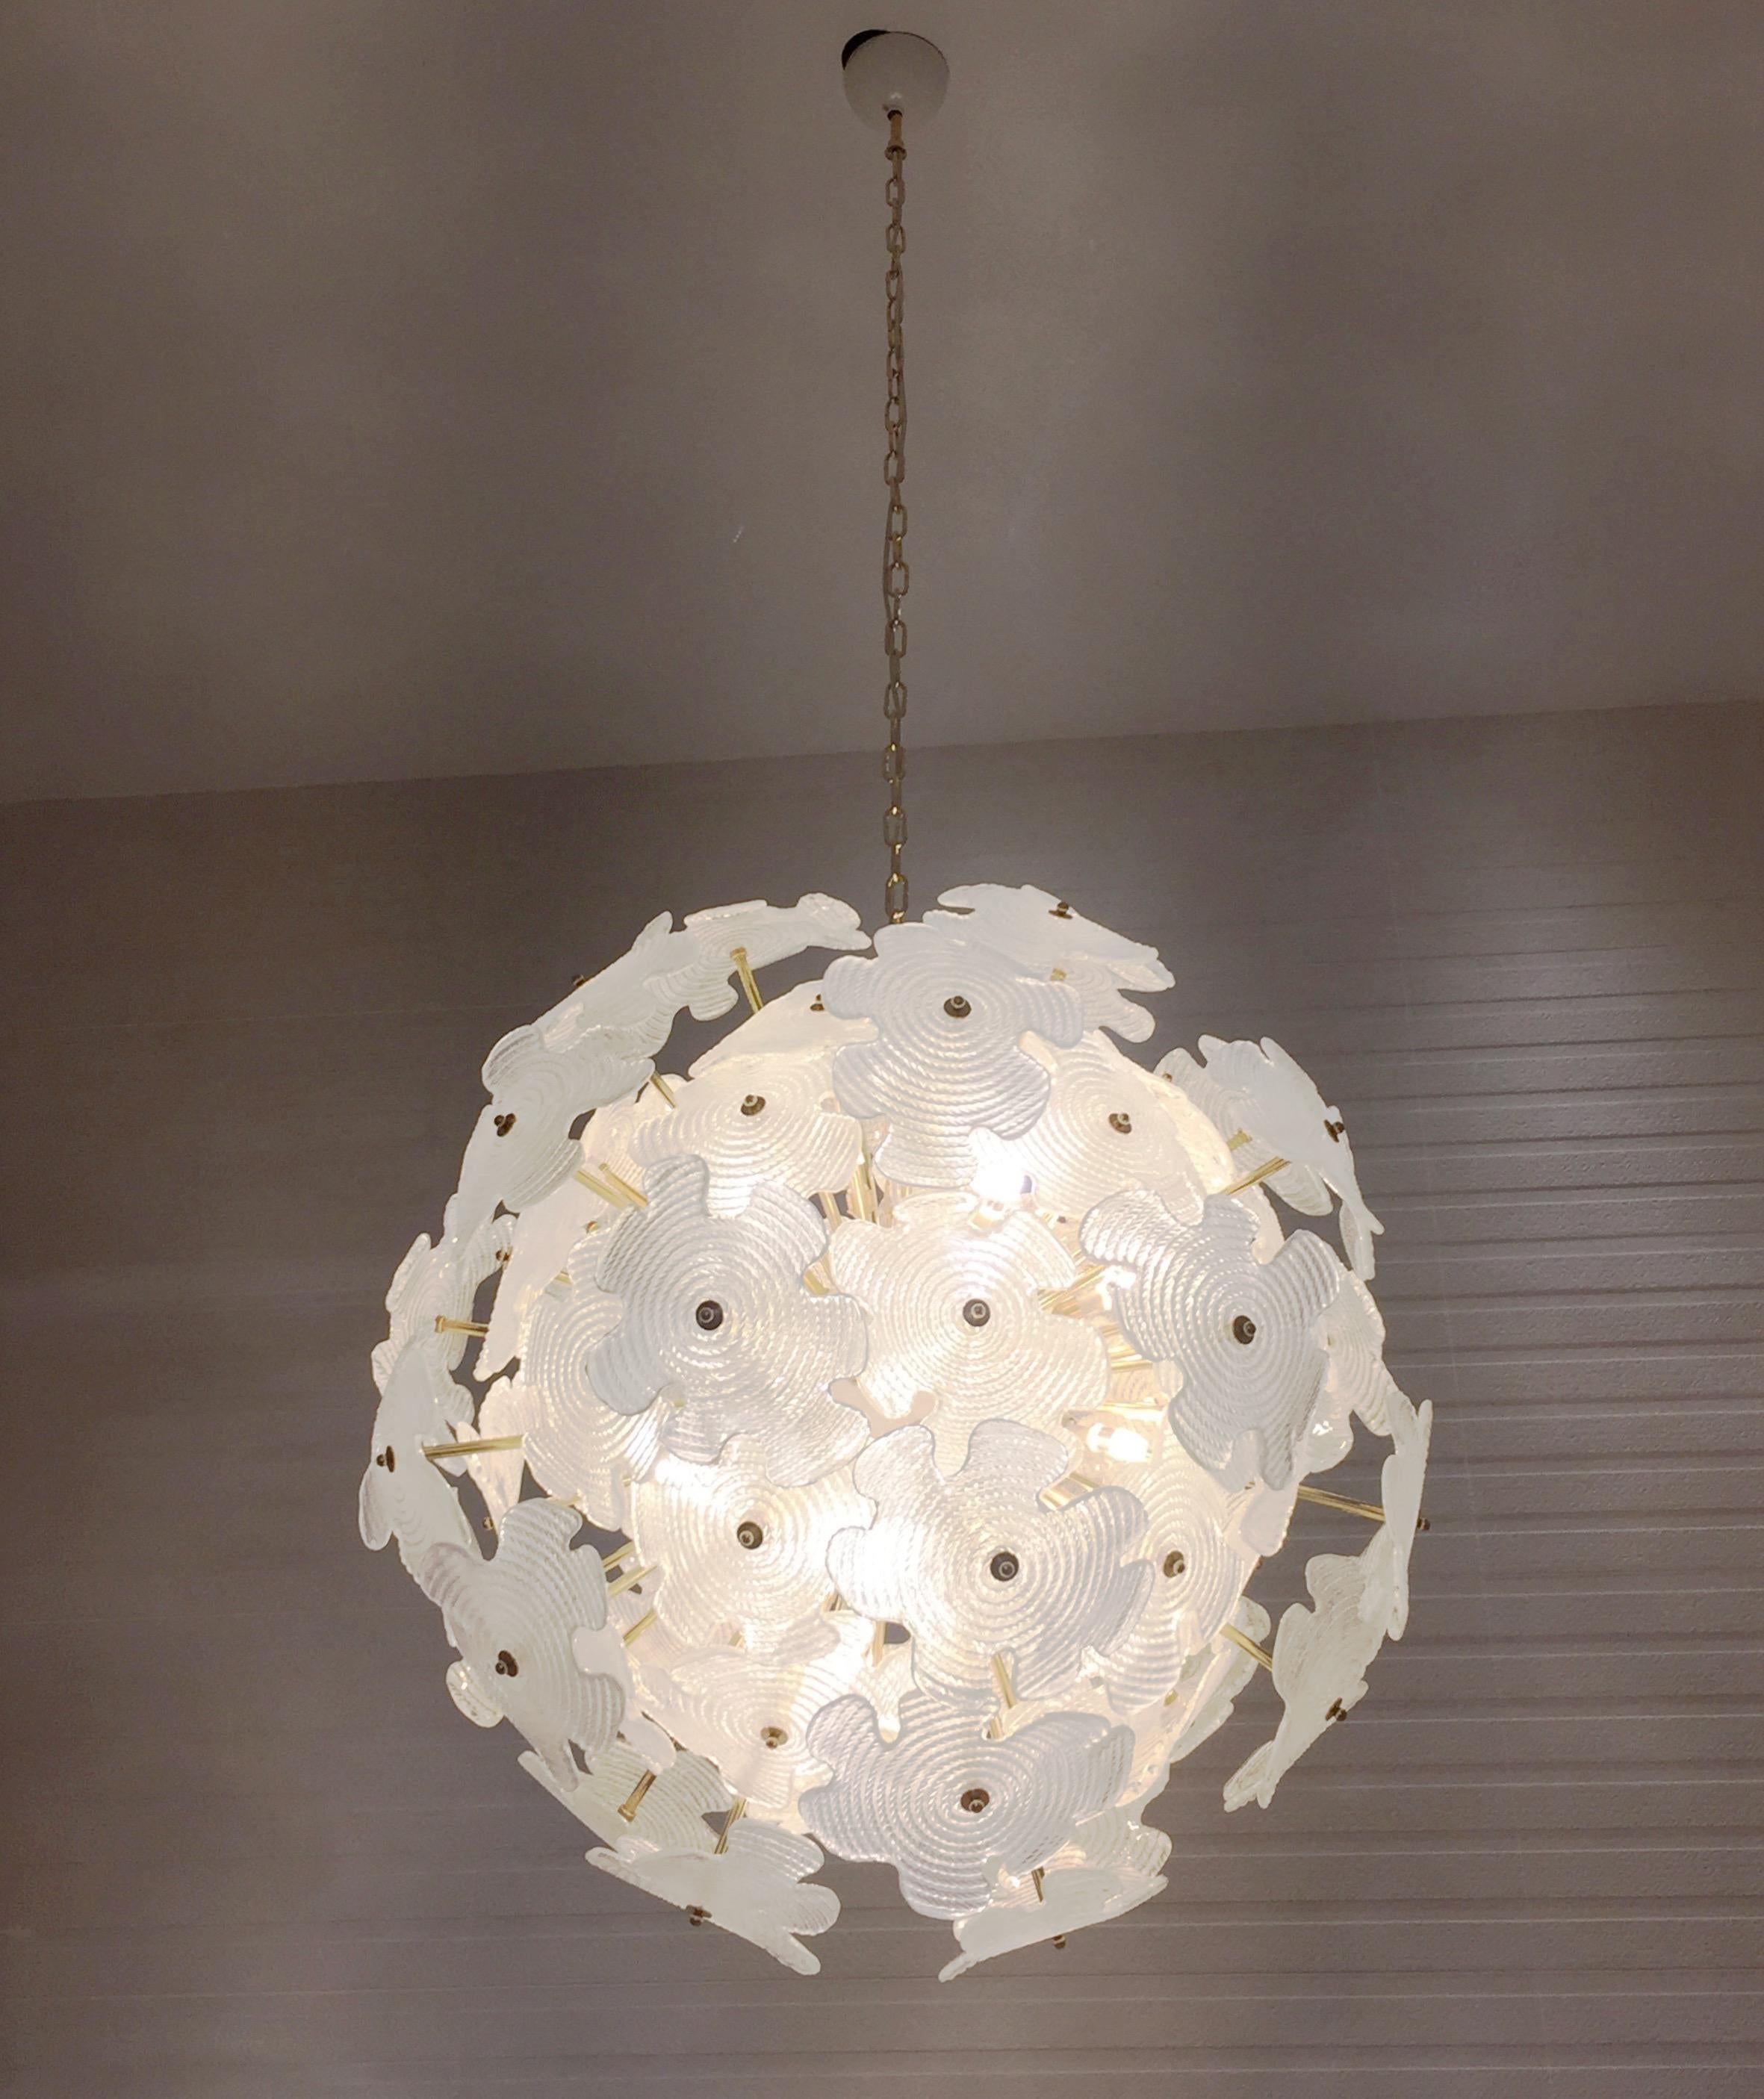 A very elegant sputnik chandelier, entirely hand made in Italy, with a round design showing exquisite details of construction and high quality of craftsmanship. A central sphere, in white cold painted brass, supports a cluster of intertwined